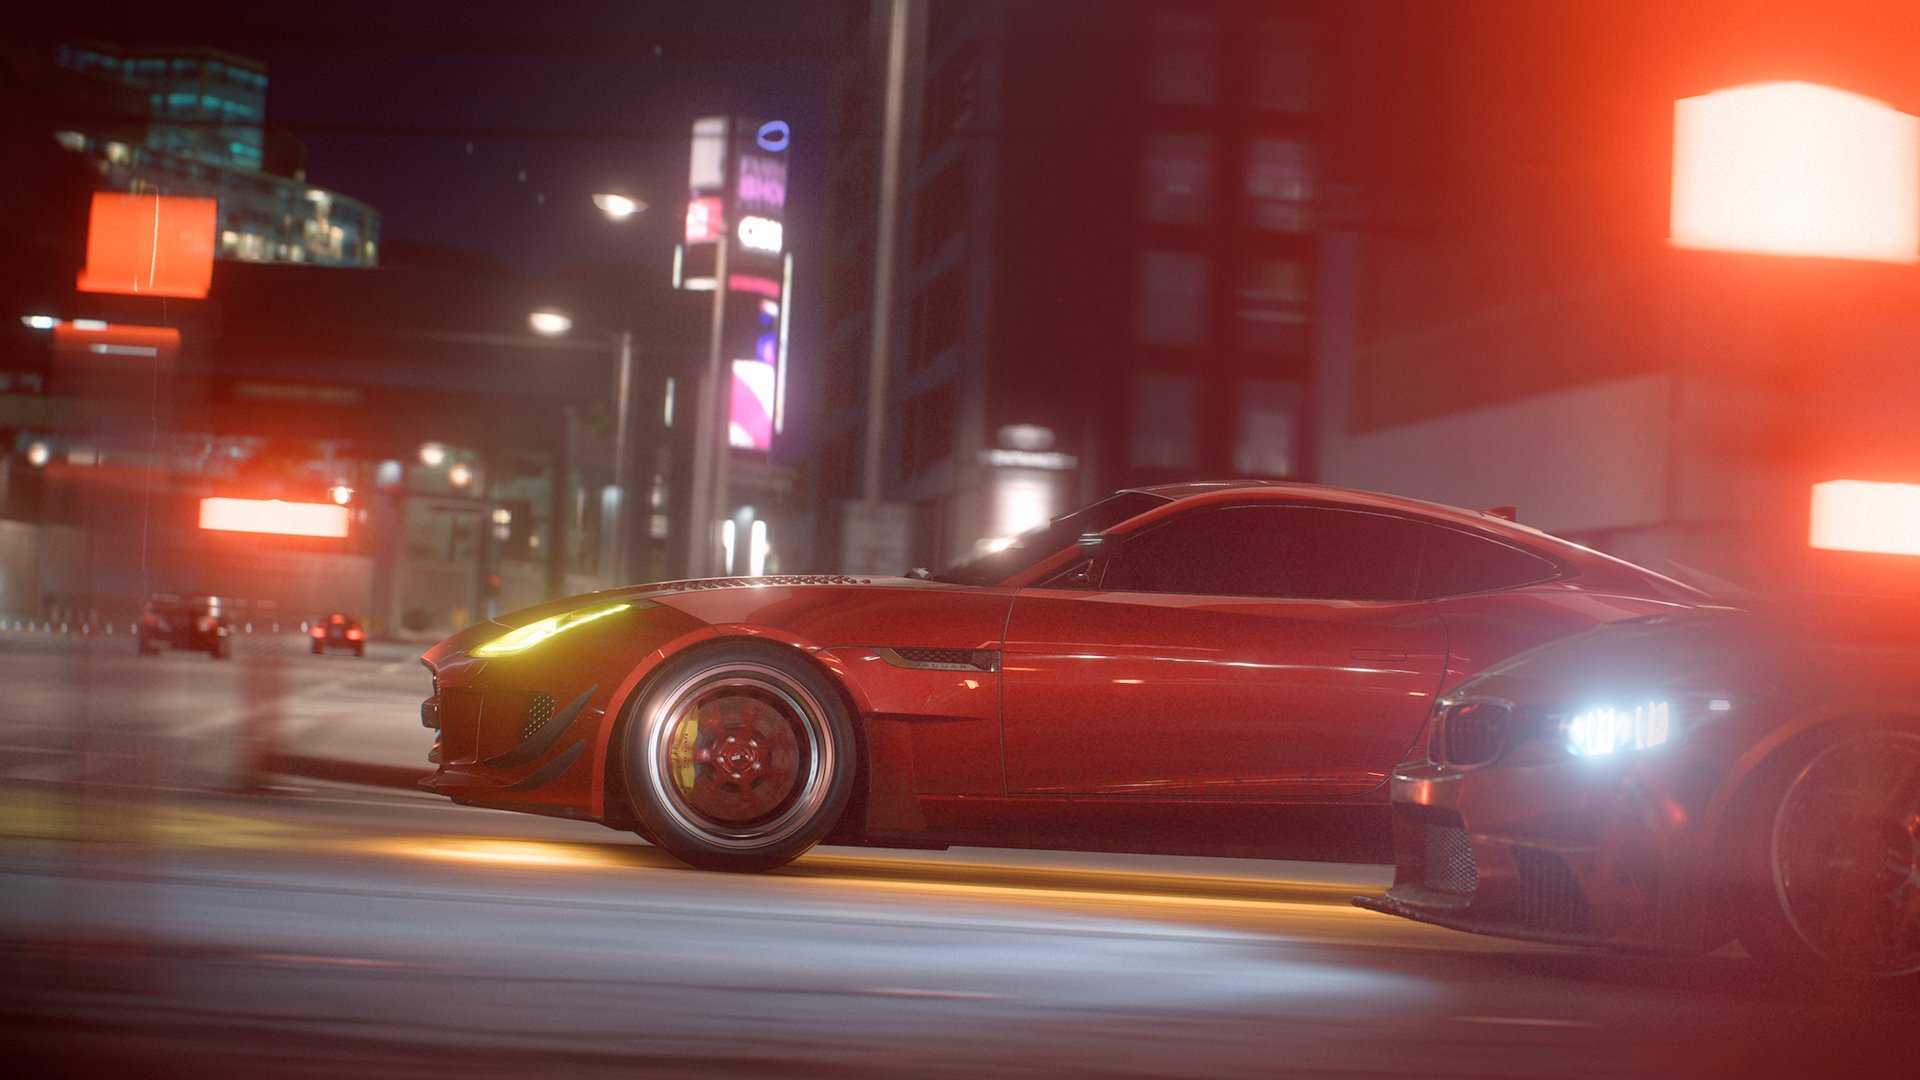 Disapprove: Need for Speed Payback (and few words on Heat